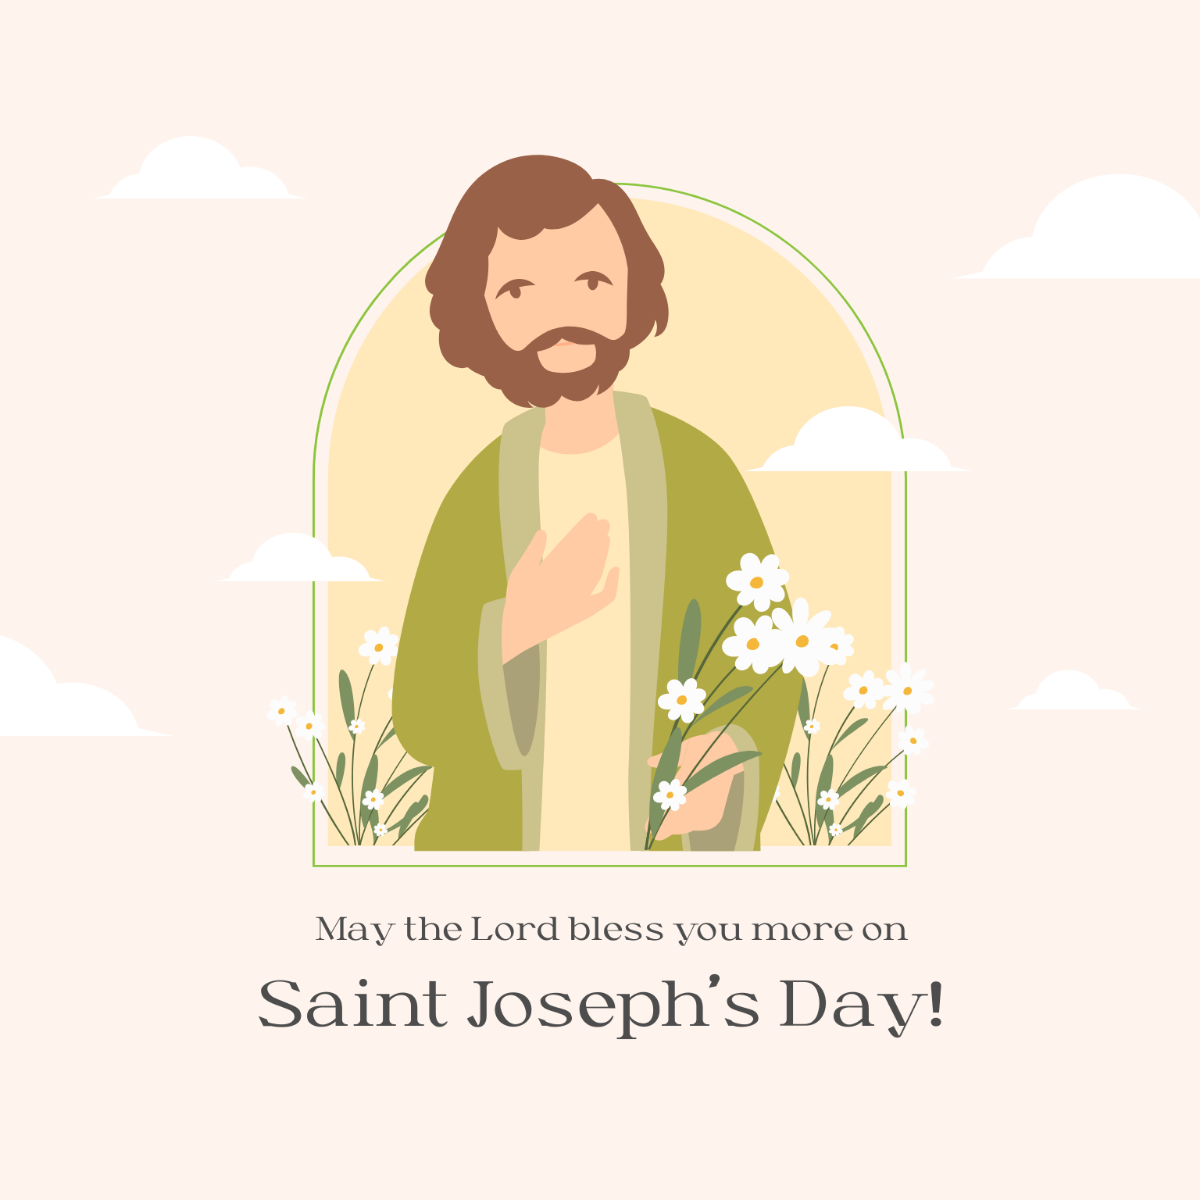 Saint Joseph's Day Wishes Vector Template